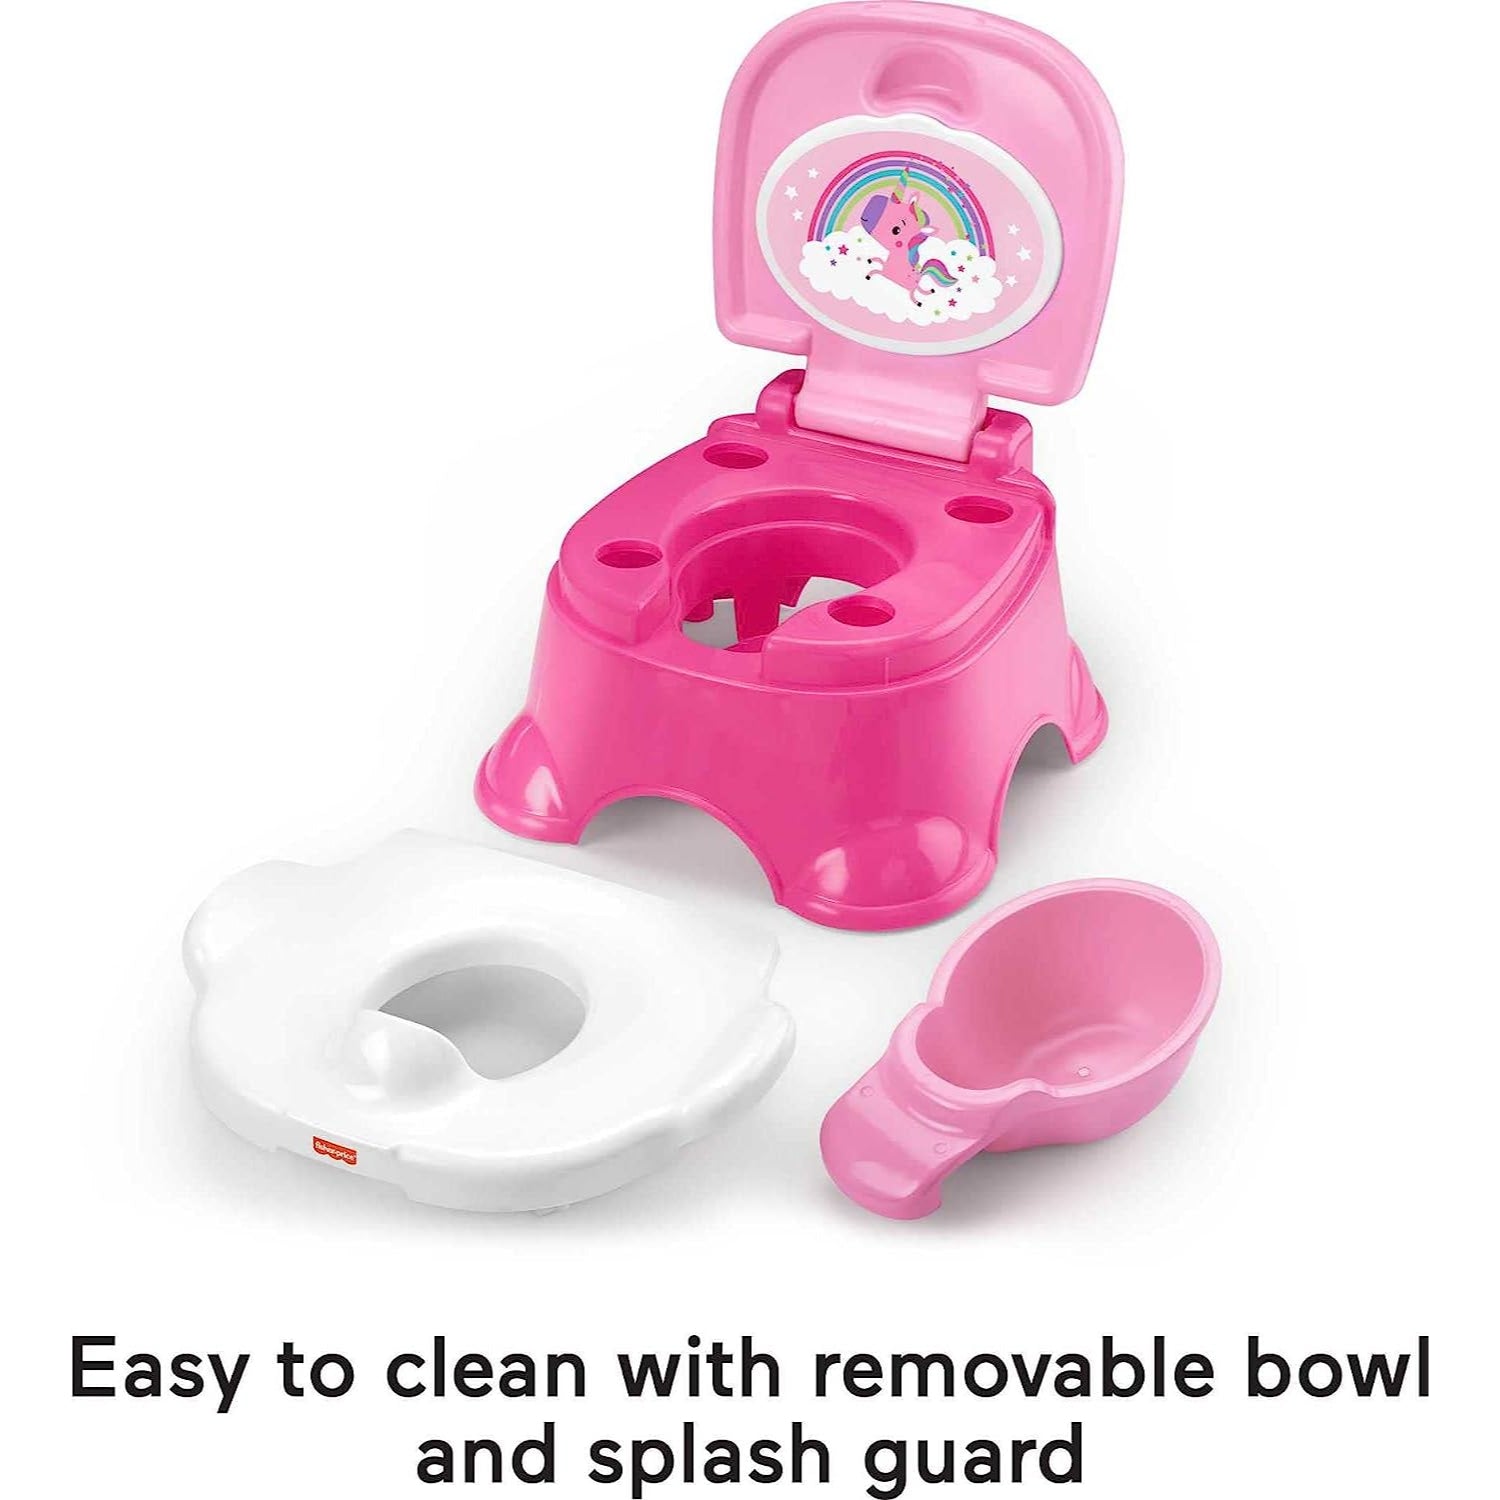 Fisher Price 3-in-1 Unicorn Tunes Potty Training Toilet Ring and Step Stool for Toddlers